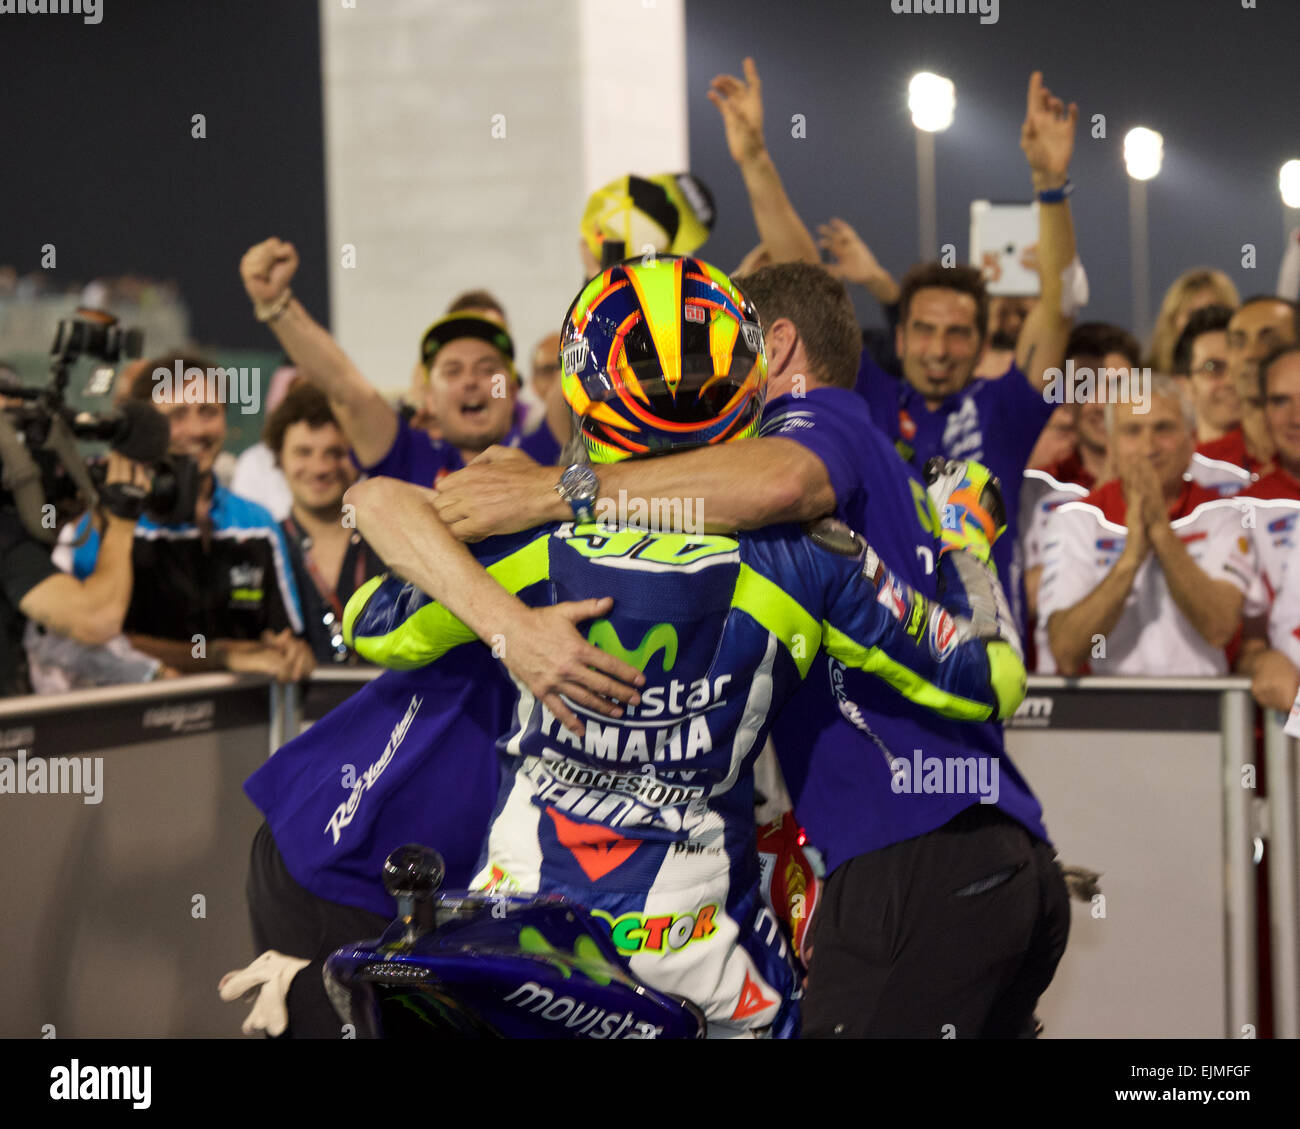 Losail Circuit, Qatar 29th March 2015, Valentino Rossi is congratulated by his team after winning the 2015 FIM Motorcycle Grand Prix of Qatar © Tom Morgan / Alamy Stock Photo